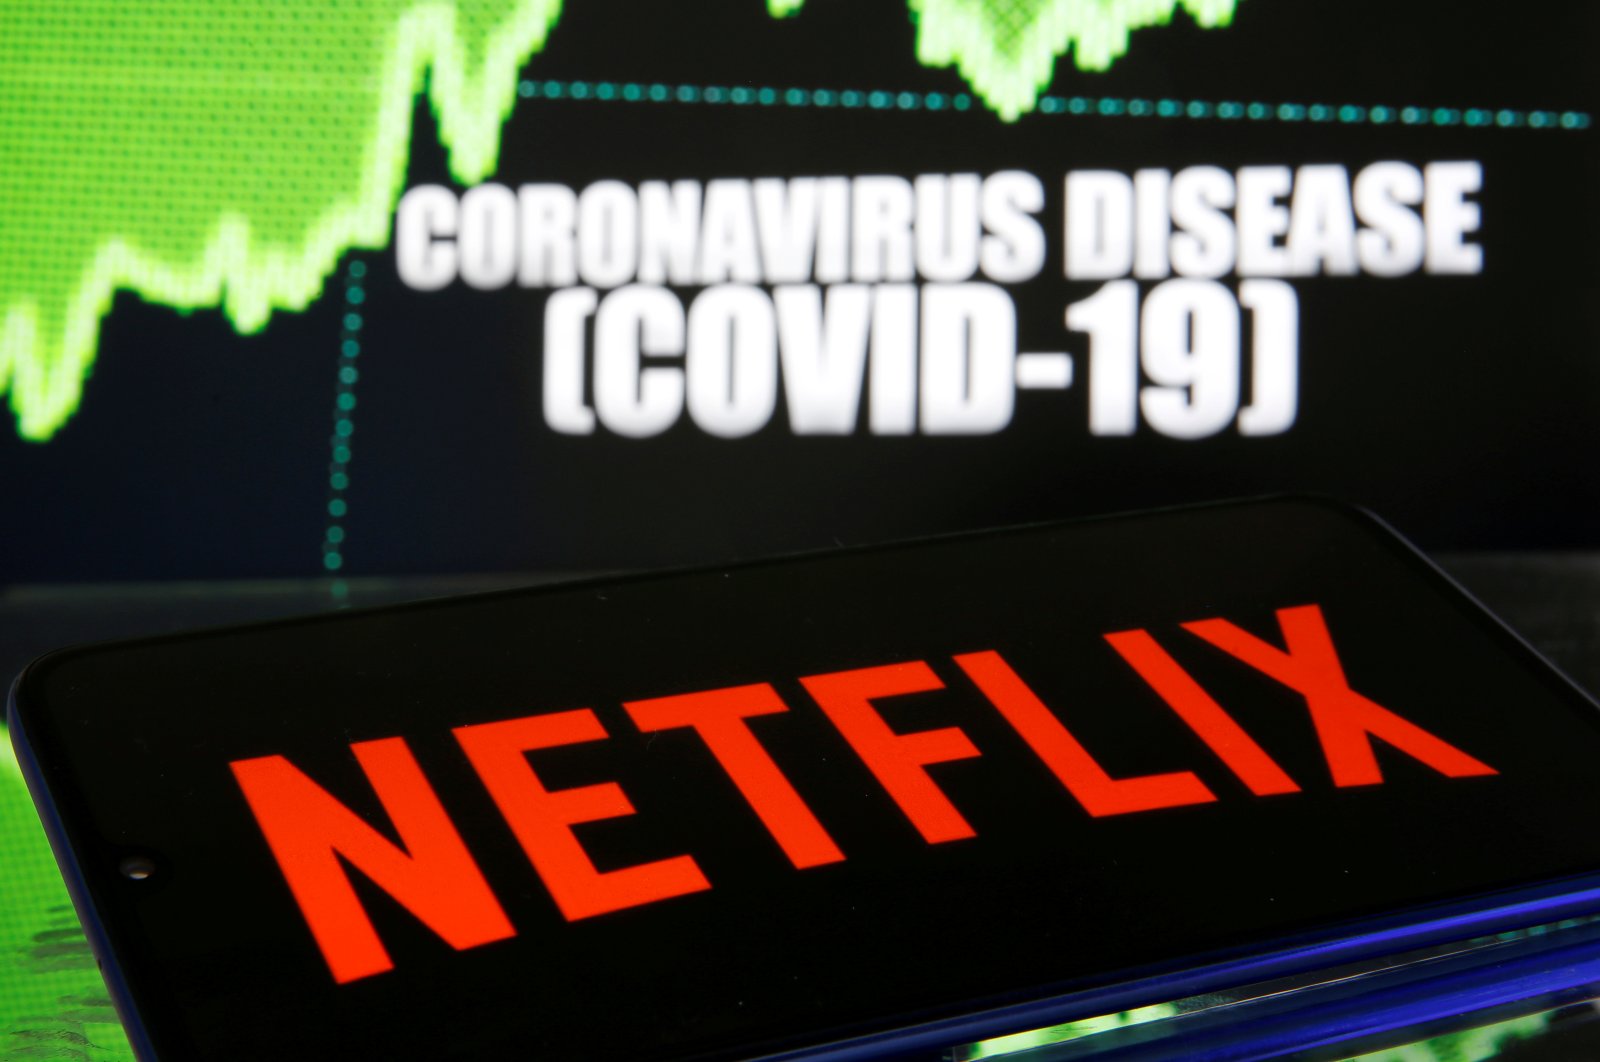 Netflix logo is seen in front of diplayed coronavirus disease (COVID-19) in this illustration taken March 19, 2020. (Reuters Photo)